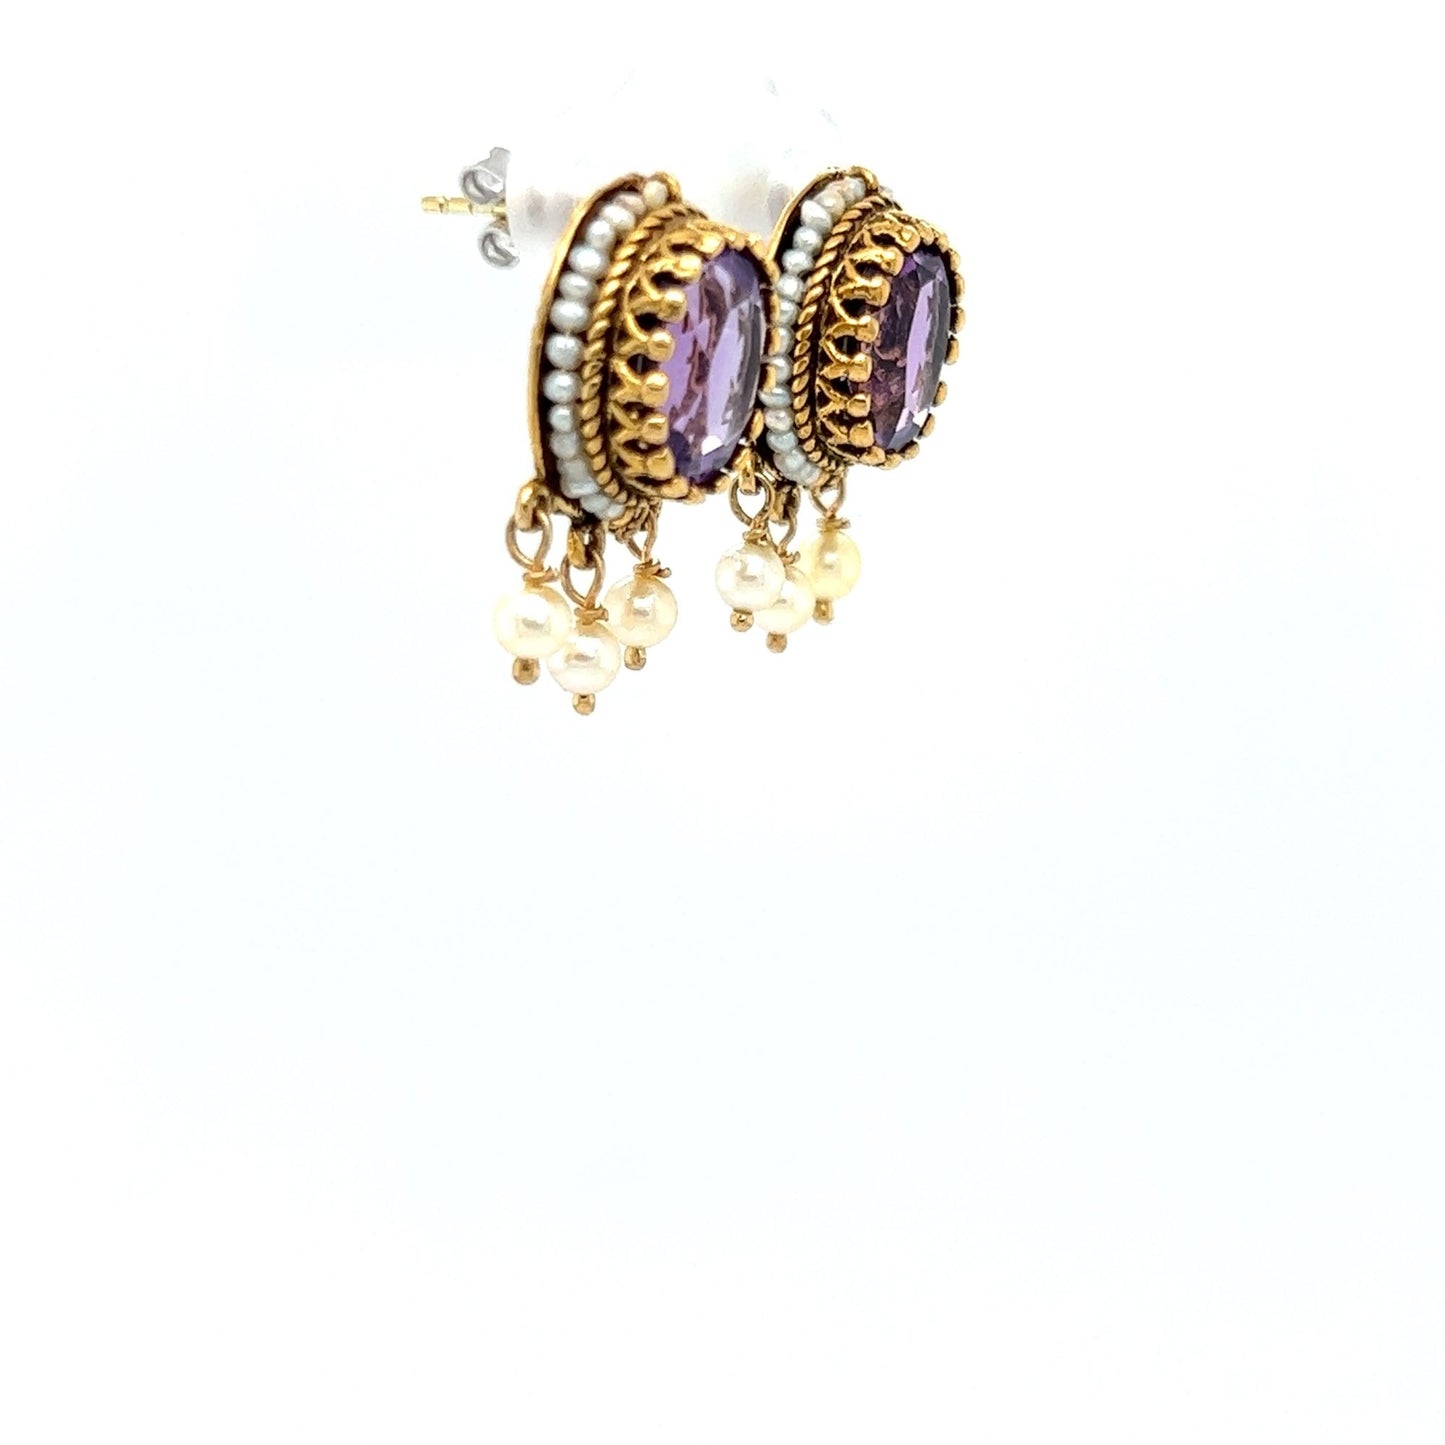 Vintage 14kt Yellow Gold Amethyst and Pearl Earrings w/ Seeded Pearl and Filagree Accent